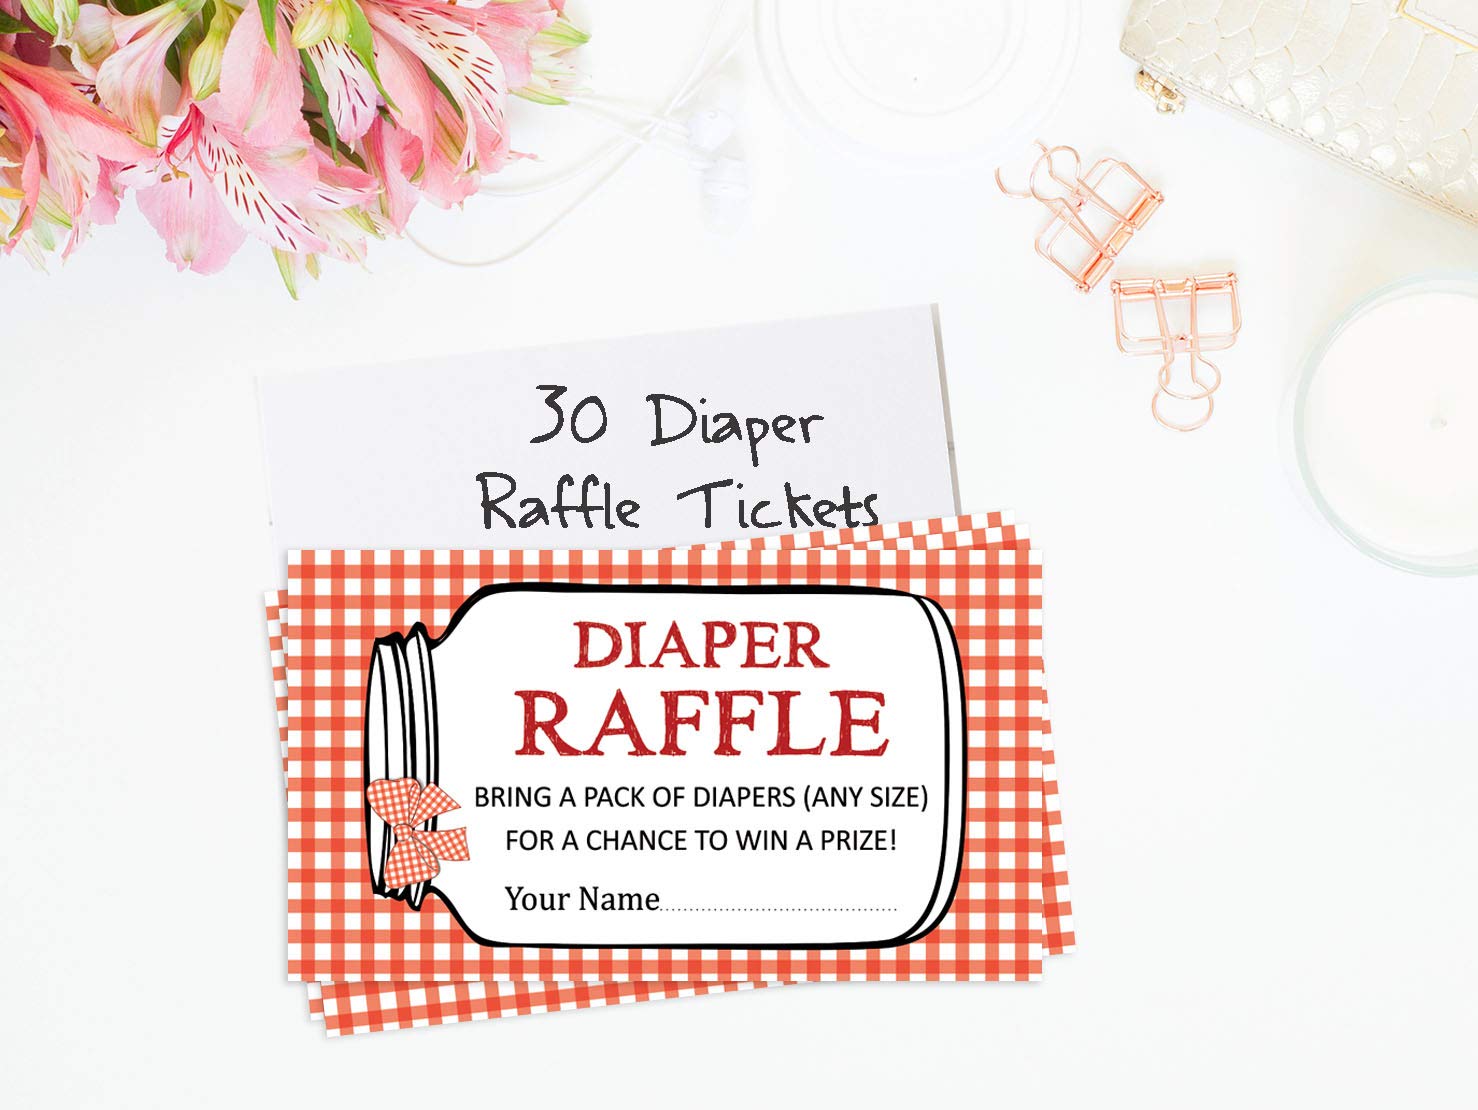 Inkdotpot 30 BBQ Baby Shower Diaper Raffle Ticket Lottery Insert Cards Supplies Games for Baby Shower Party Bring A Pack of Diapers to Win Favors Gifts and Prizes